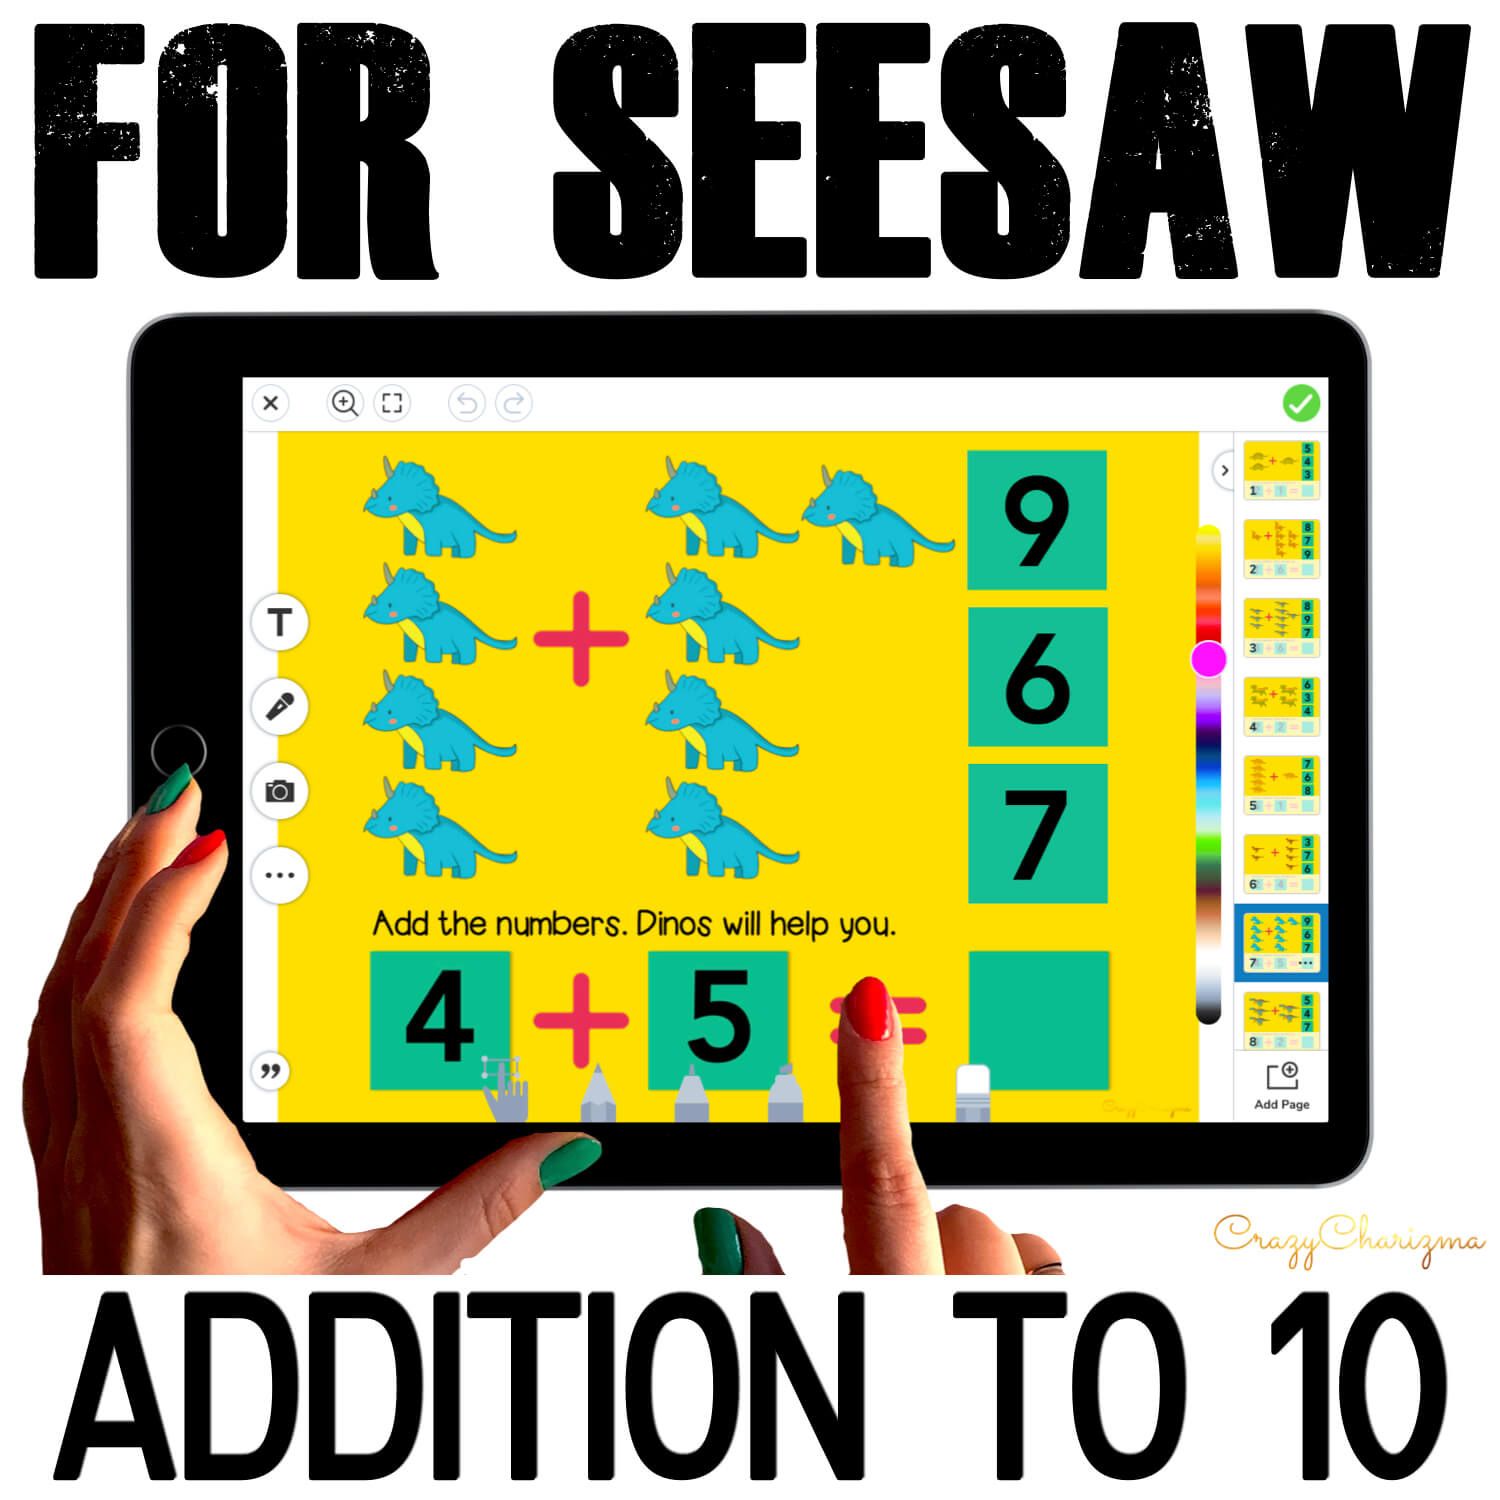 Need fun activities to use in Seesaw? Looking for an engaging Addition to 10 practice for distance learning? Have fun with this math center. Kids will add numbers and drag moveable pieces with the correct answer. Pictures of dinos will help!